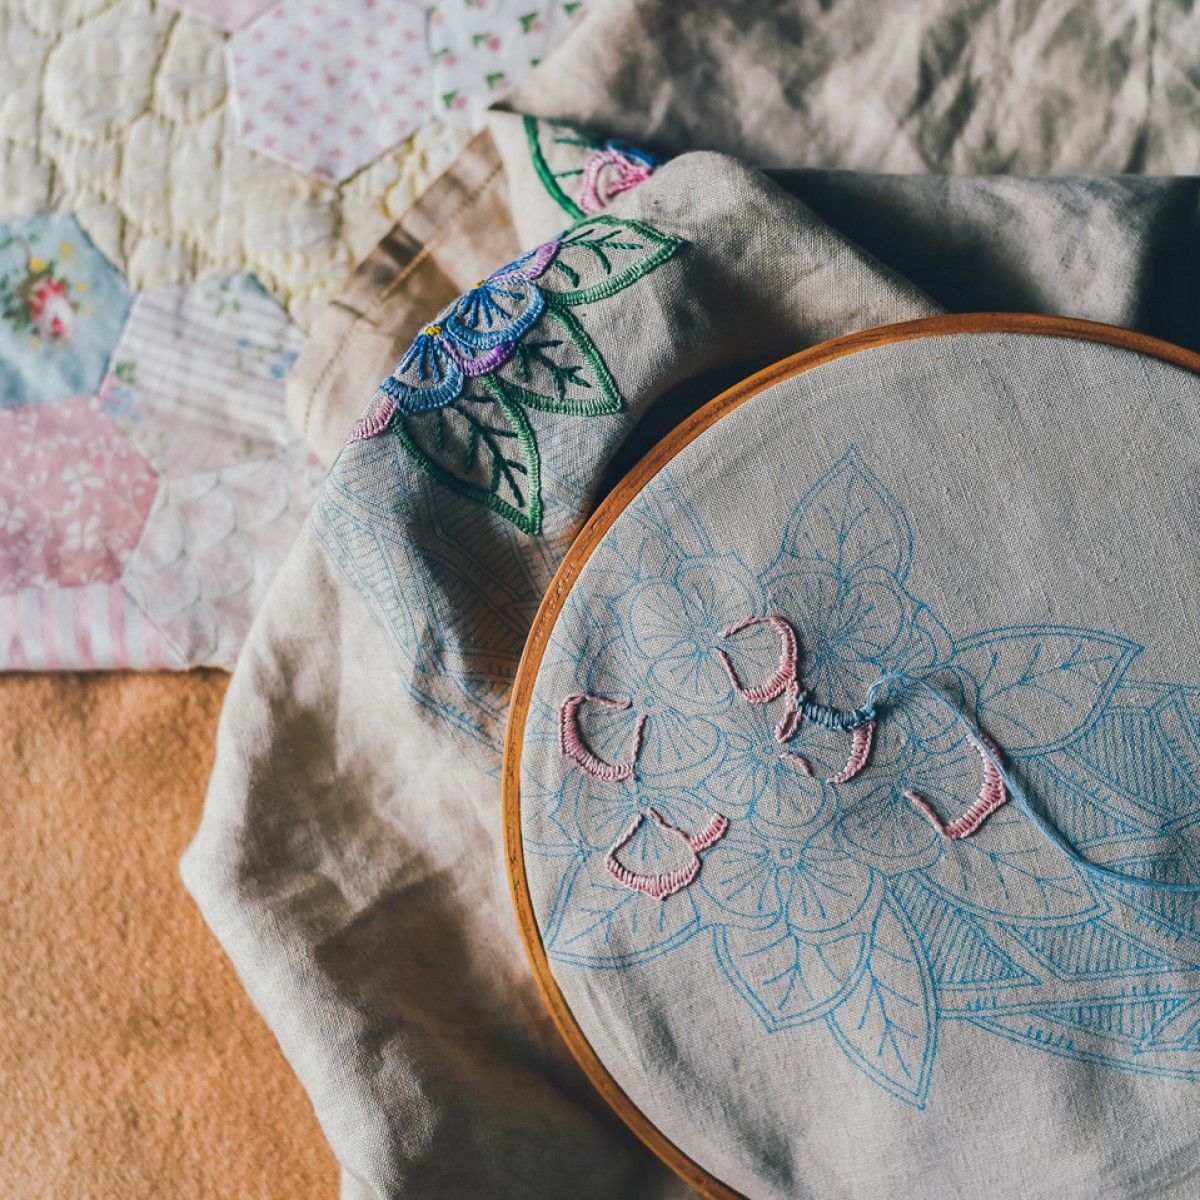 Free Paper Embroidery Patterns And Instructions 5 Simple Ways To Transfer Embroidery Designs